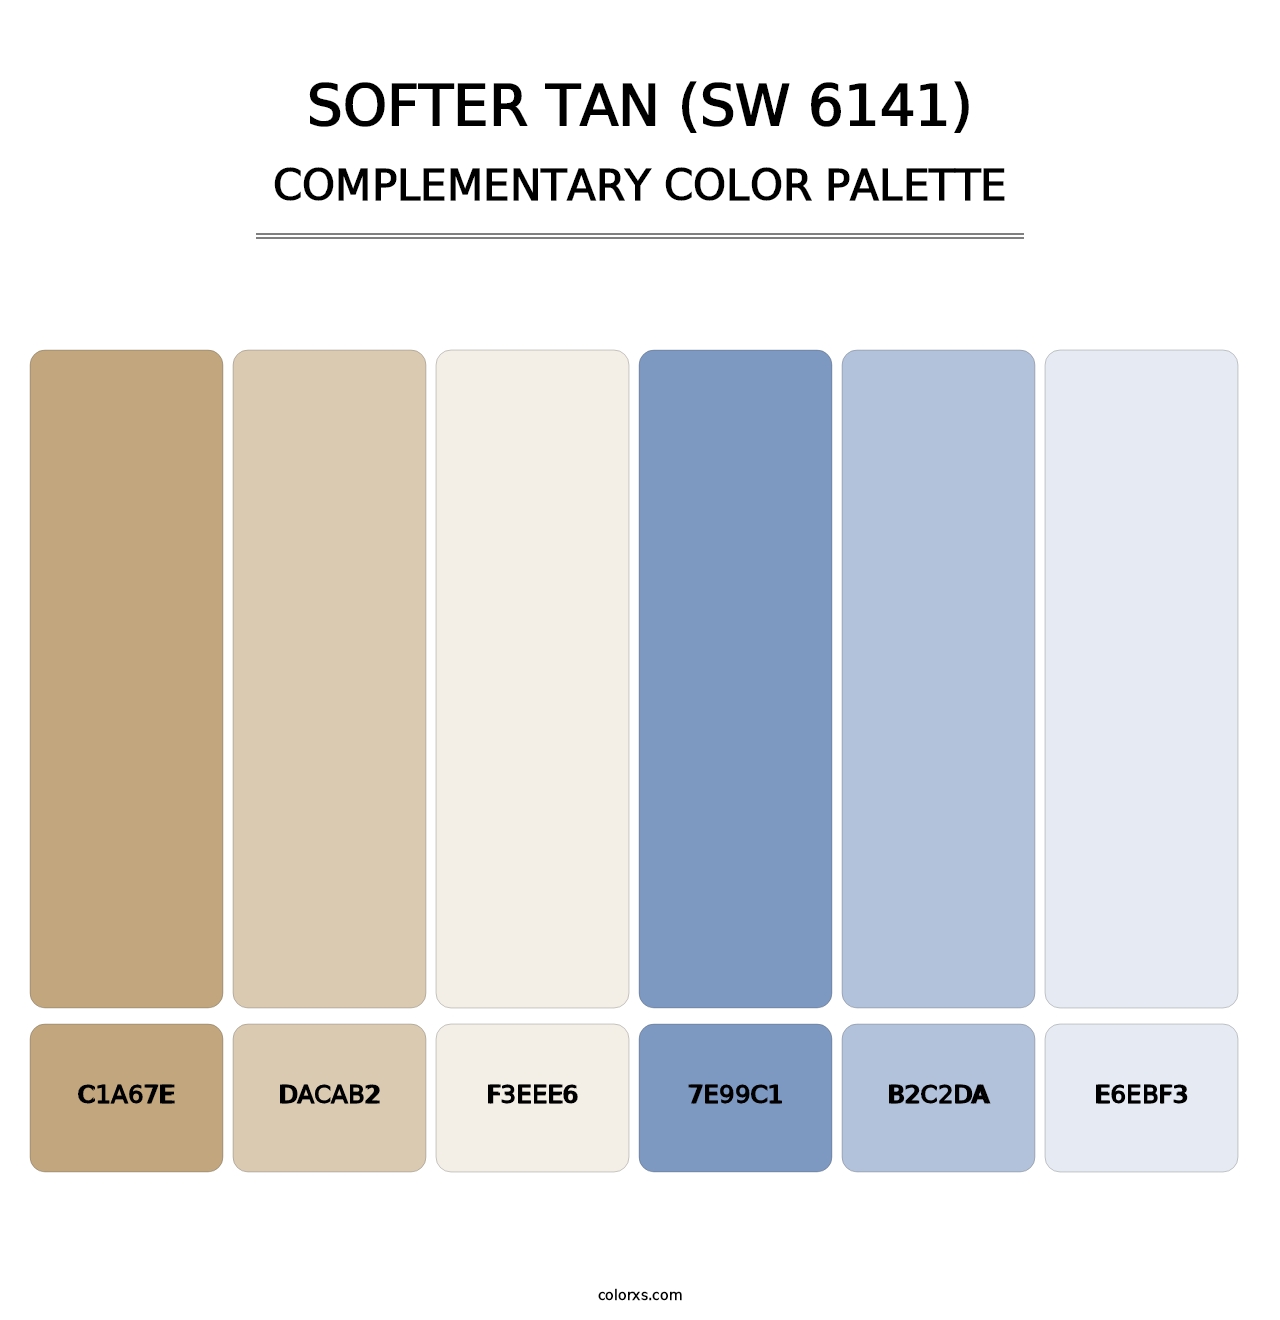 Softer Tan (SW 6141) - Complementary Color Palette